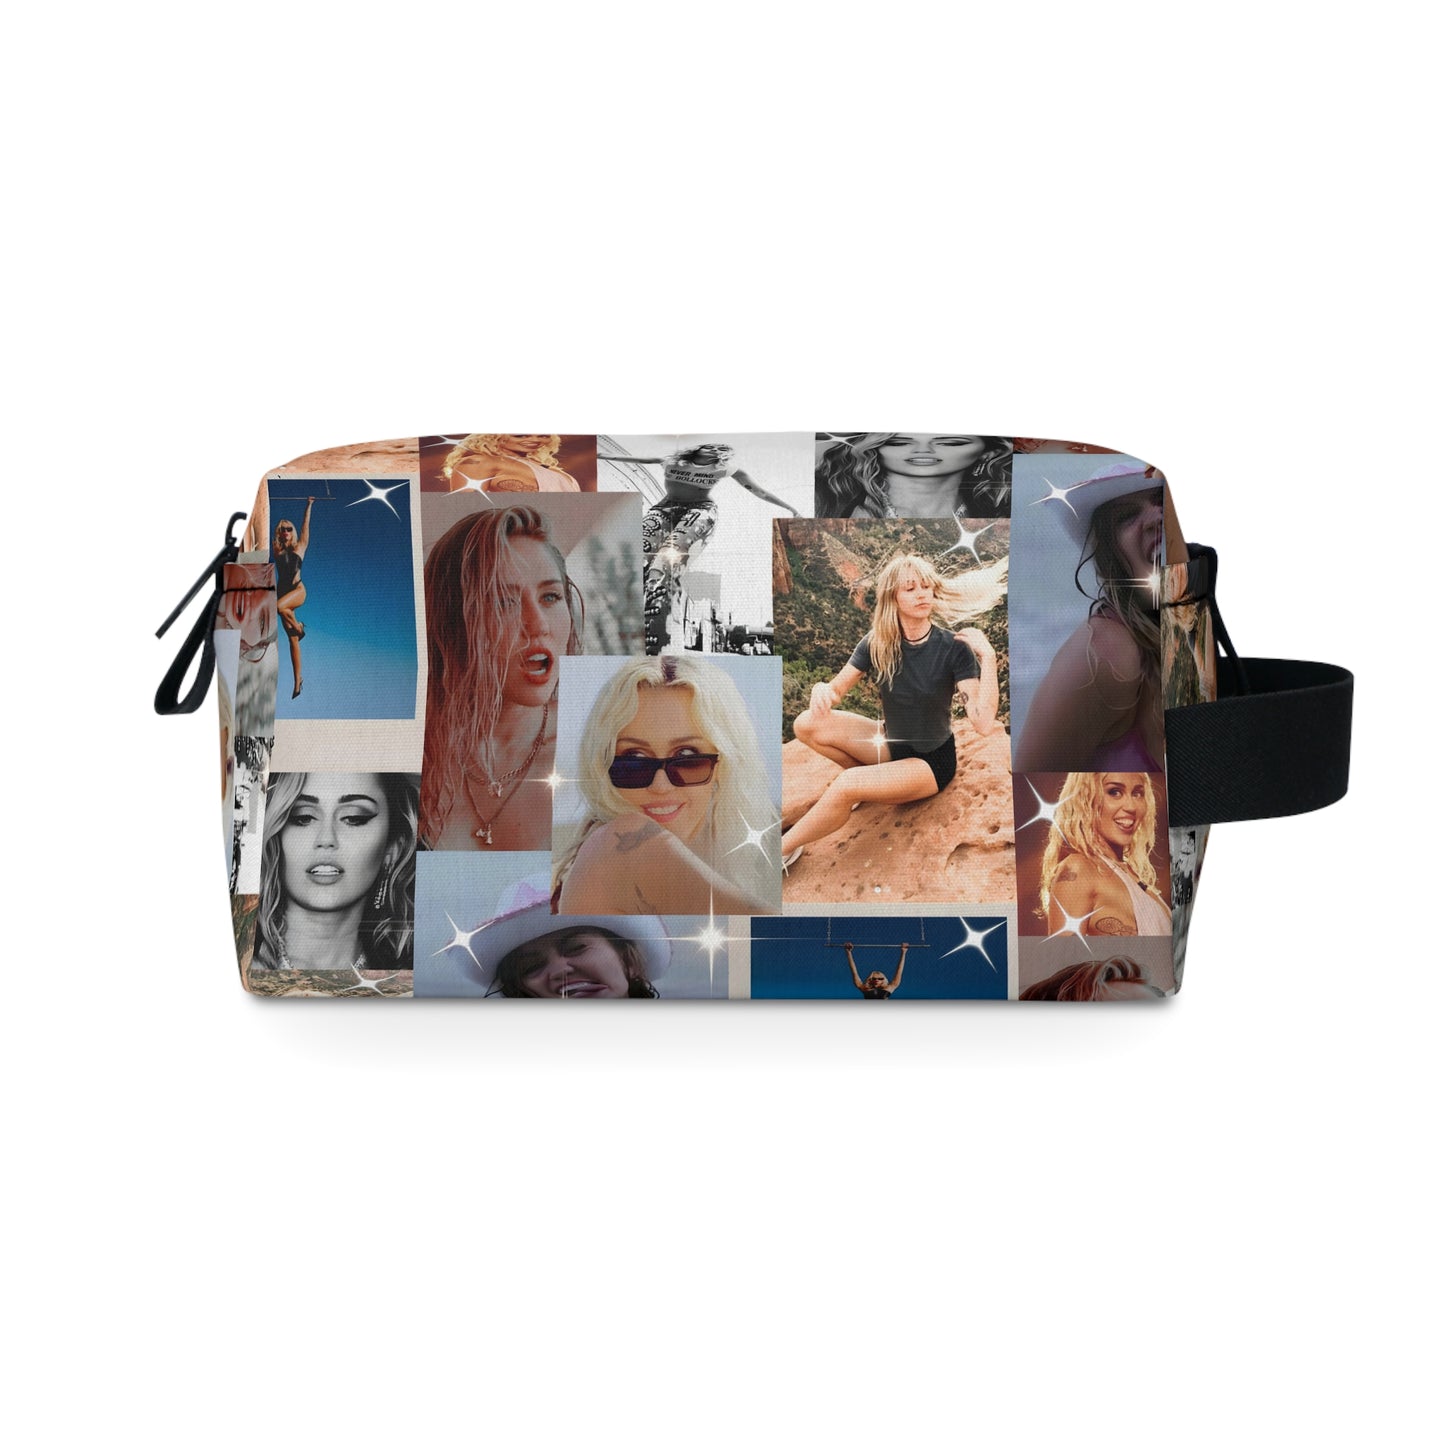 Miley Cyrus Flowers Photo Collage Toiletry Bag